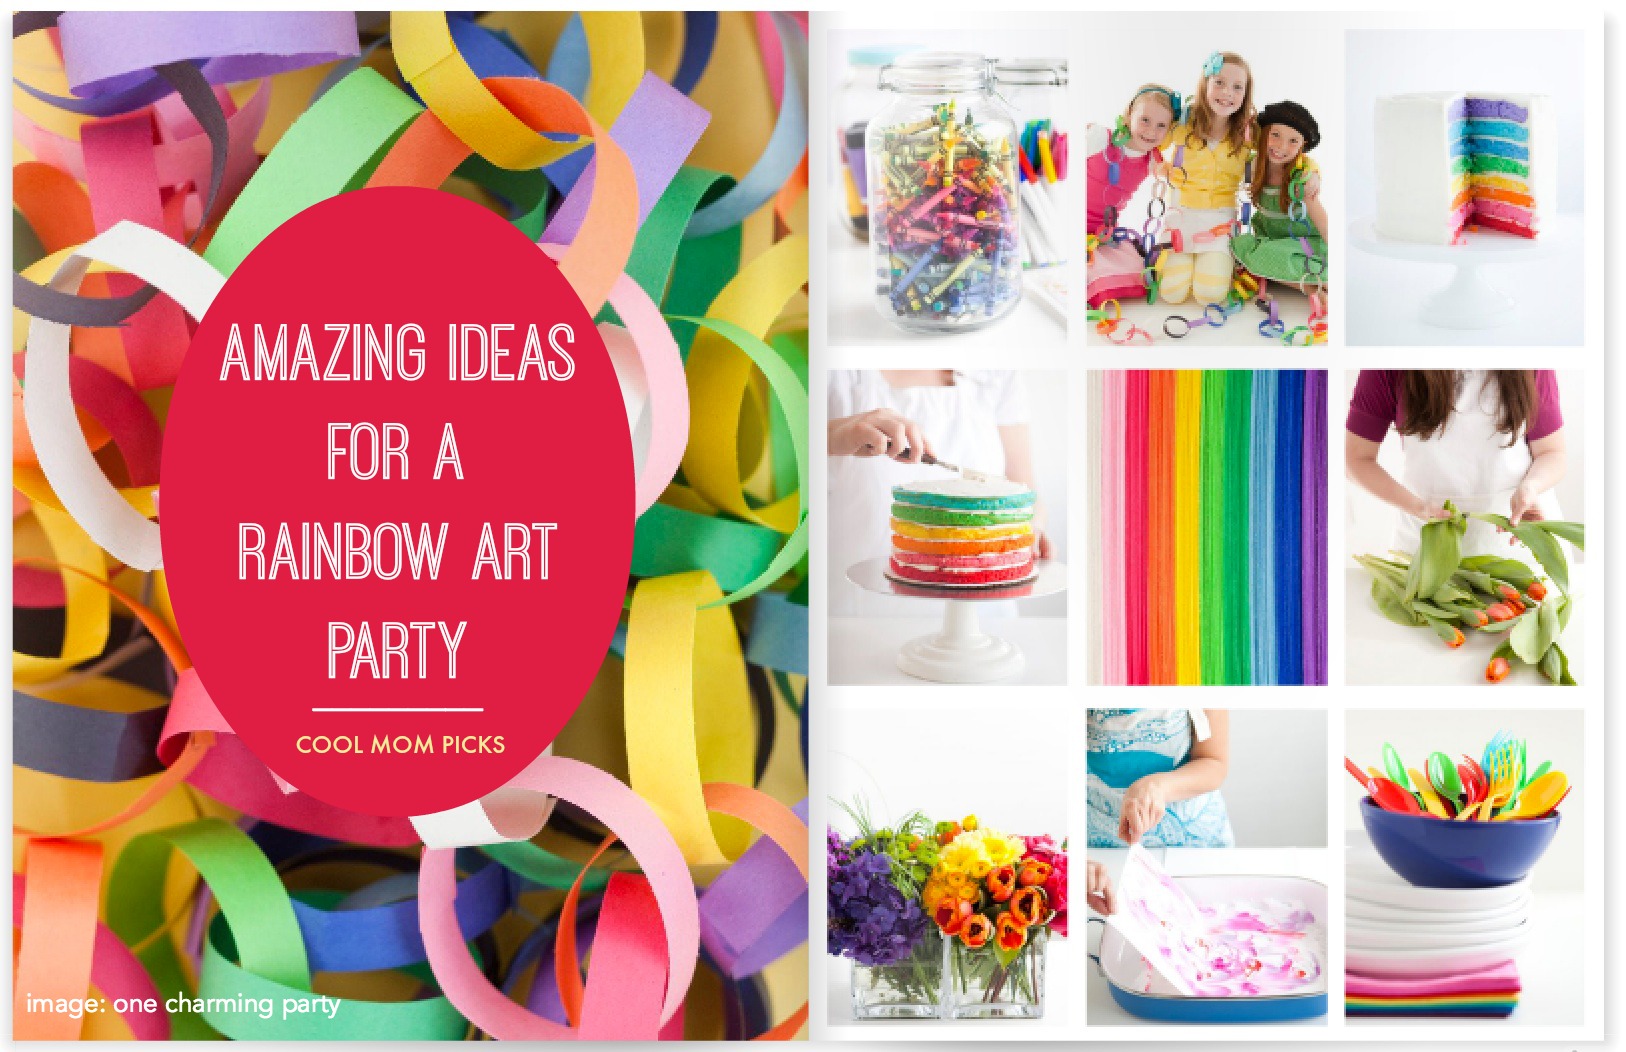 How to throw a rainbow art party: A rainbow party for kids with a creative twist